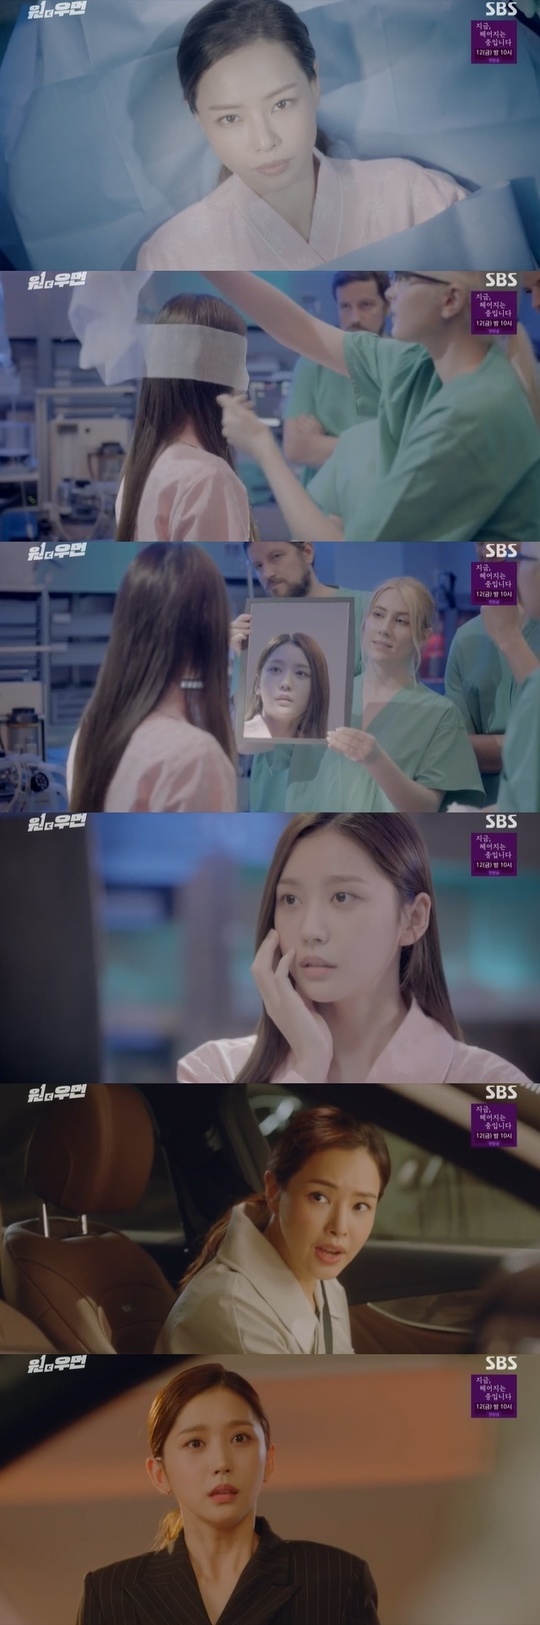 Jin Seo-yeons identity as a travel secretary turned out to be Lee Ha-nui, who had a full-body molding.In the 14th episode of SBS gilt drama One the Woman (playplayed by Kim Yoon and directed by Choi Young-hoon), which was broadcast on October 30, the crisis of supporting actor Lee Ha-nui, who was completely tied to the counterattack of Han Sung-hye (Jin Seo-yeon) and Ryu Seung-deok (Kim Won-hae), was drawn.On this day, Han Sung-hye not only took his hand with Ryu Seung-deok to inform the world of the corruption of his father Han Young-sik (National Hwan), but also made a formal issue of impersonating Kang Mina (Lee Ha-nui) of his supporting actor.Han Sung-hyes tricks did not stop here.From the death of Han Seung-wook (Lee Sang-yoon), to the fire at the Hanju factory, even the hit-and-run incident of the supporting actress, he covered up all his crimes with his secretary, Jung Do-woo (Kim Bong-man).When Cho Yeon-ju, Han Seung-wook, and Roh Hak-tae (played by Kim Chang-wan), who were driven to the edge of the cliff, were frustrated, a hand of help was handed over to the questioning place.Someone sent a USB containing Han Seung-wooks Hanju Chemical Thallium theft, Han Sung-hye and Jung Woos account transaction details, and Hanju Fashion accounting data 14 years ago.Cho Yeon-ju, Han Seung-wook, and Roh Hak-tae were able to regain their energy by showing evidence that would bring about a new phase, but were wondering who was helping them.Also in a difficult situation where the data alone turned everything over right now, Cho Yeon-ju began to focus on the whereabouts of Kang Mina, the real answer to all of this.Cho Yeon-ju had reasoned that Kang Mina, a much bolder woman than she thought, would not be hiding like this, and Kang Mina would be near Han Seong-hye at present.Cho Yeon-ju fell in love with who was the new person who appeared around Han Sung-hye right after the incident.The answer was Han Sung-hyes travel secretary, Eunjung.And Han Sung-hye was already in doubt that Kim Eun-jung had a scar on a similar place to Kang Mina and had already completed her genetic test.Since then, Han has asked Kim Eun-jung to eat nuts with allergies, and when Kim Eun-jung chewed nuts like a stick, this time he put a genetic test paper back with Kim Eun-jungs hair as a clear evidence and made it immobilized.Kim Eun-jung, or Kang Mina, who was caught in the identity, rushed away.However, after a while, Kang Mina became distracted by the allergic reaction, and at this time, the three-way wave called Miri by Han Sung-hye threatened her.At this time, Han Seung-wook, Wang Pil-gyu (Lee Kyu-bok), and Choi Dae-chi (Jo Dal-hwan) appeared to help Kang Mina escape.Thanks to it, Kang Mina escaped safely to the underground parking lot and the supporting actor who was waiting for Miri appeared in front of it.Cho Yeon-ju and Kang Mina had a dramatic encounter, a dramatic moment.